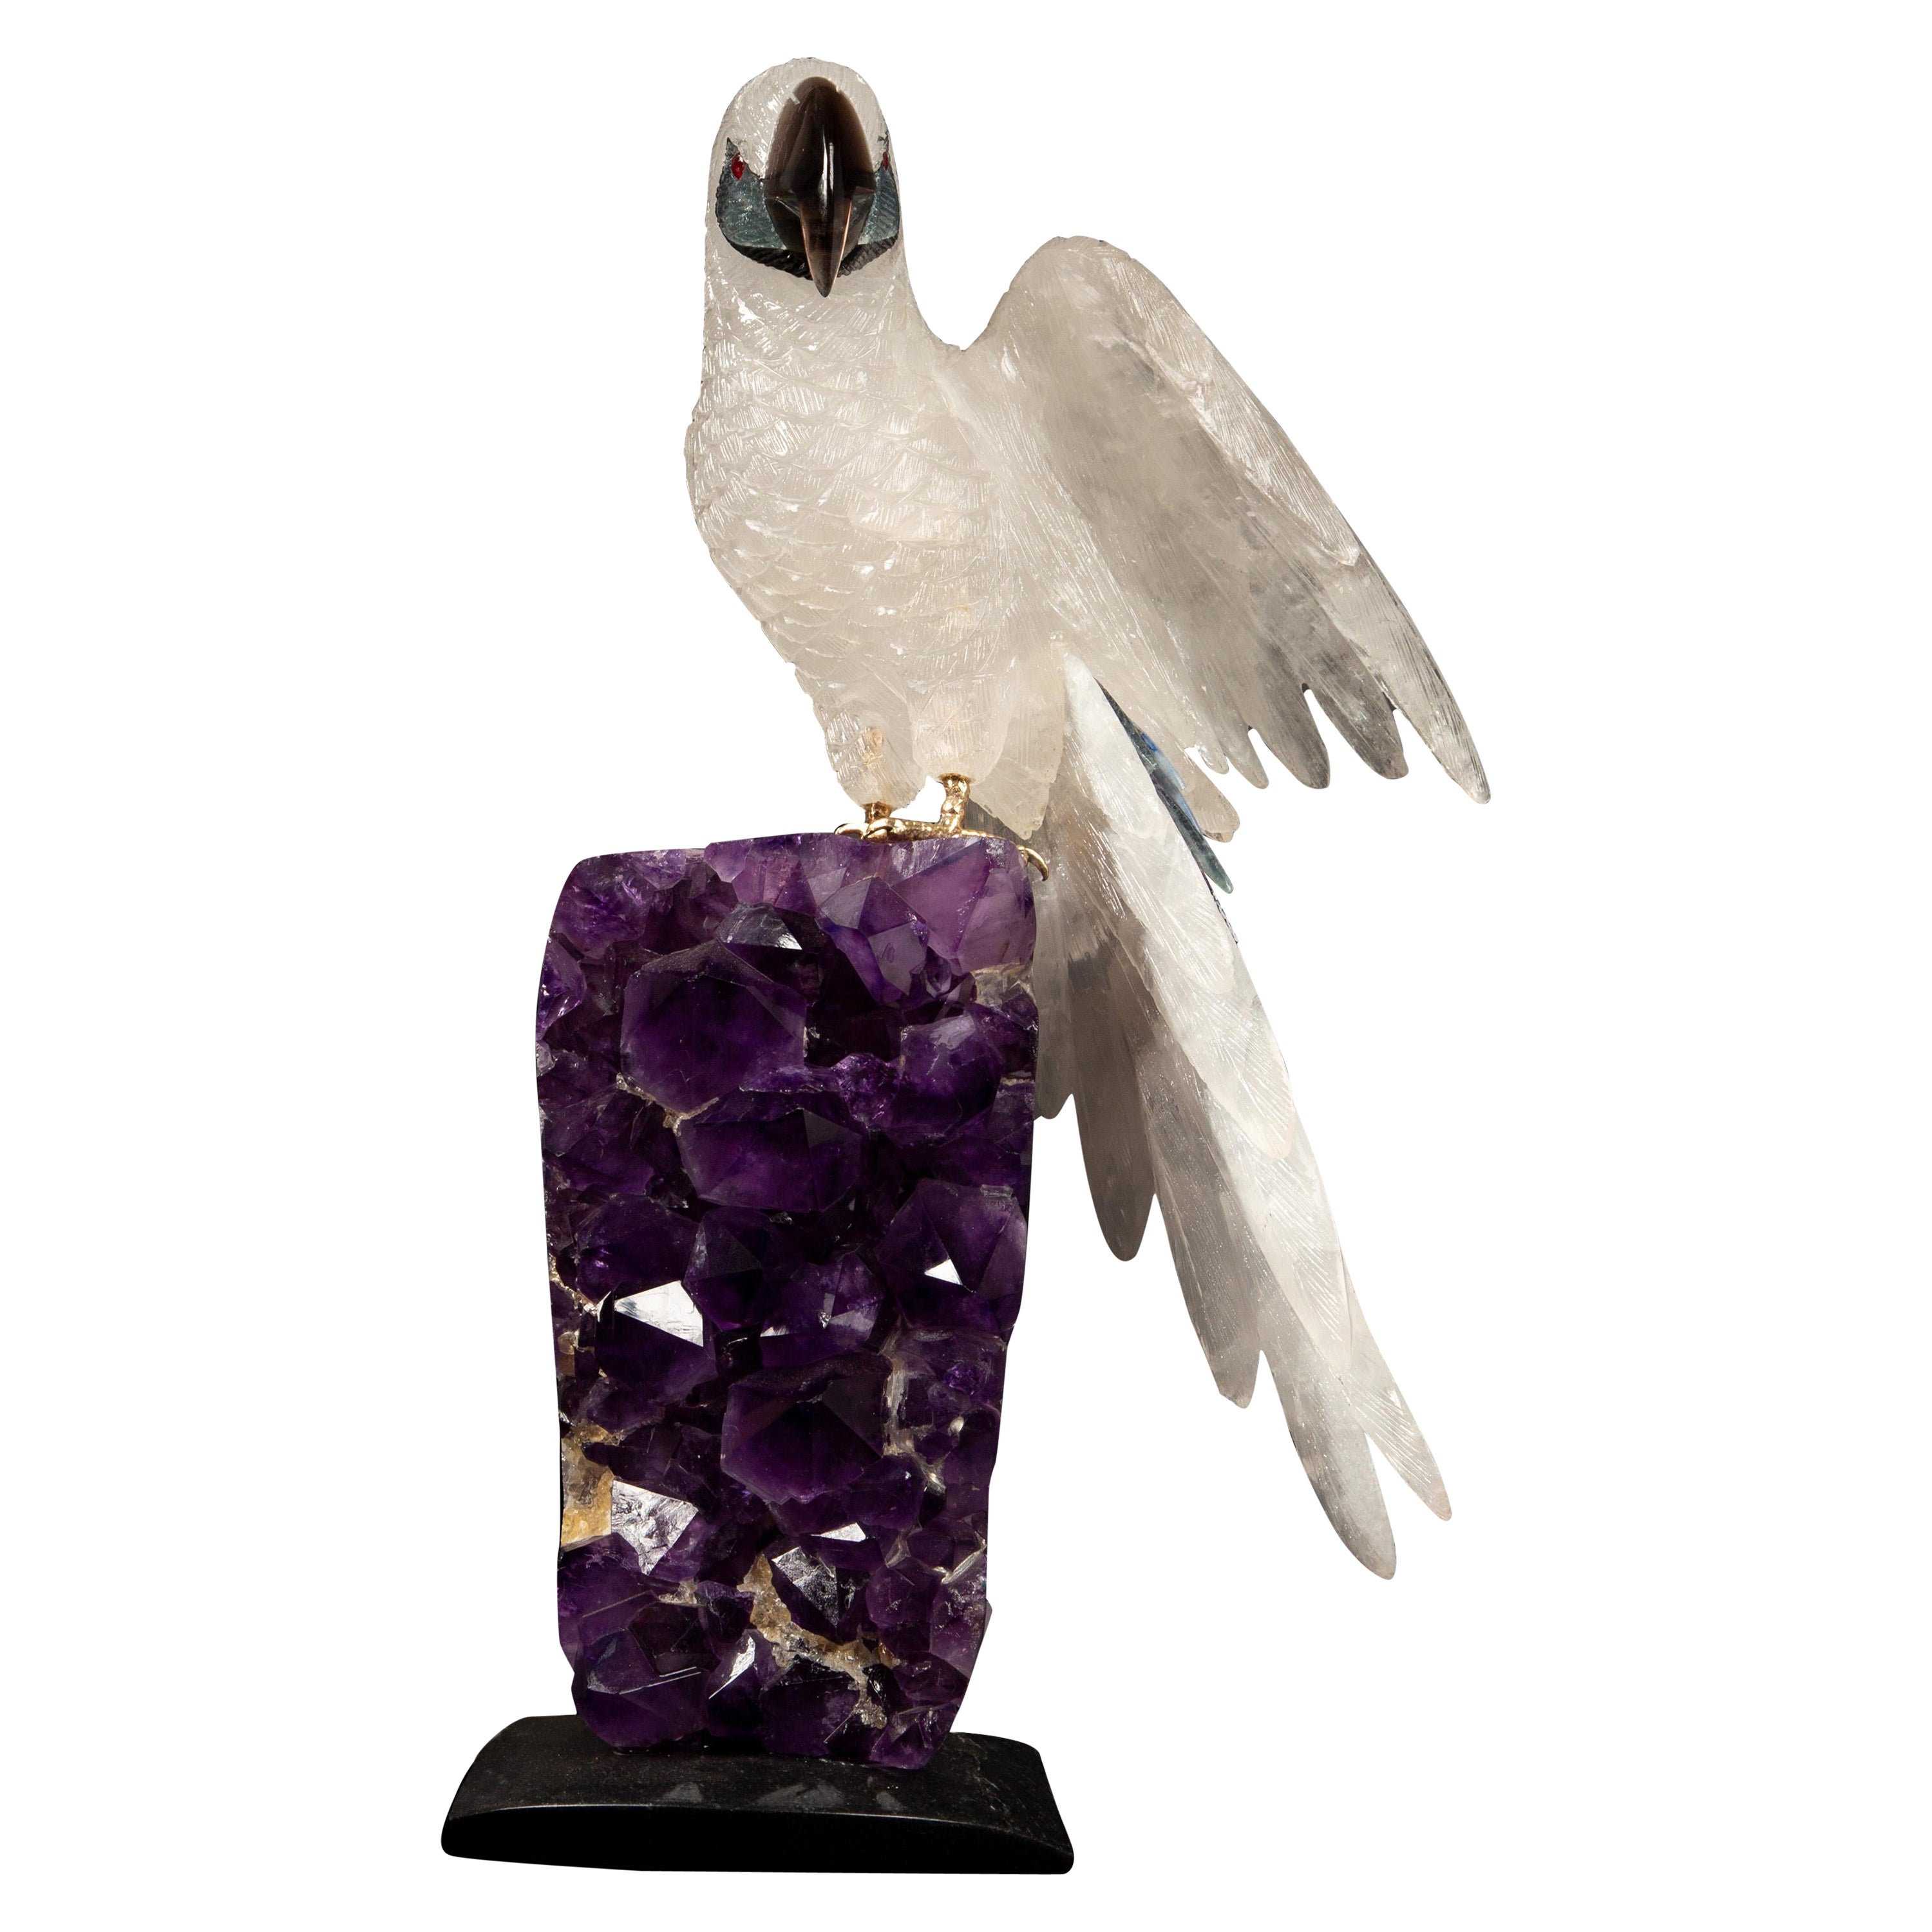 Carved Rock Crystal Parrot Mounted on an Amethyst Cluster 13"H